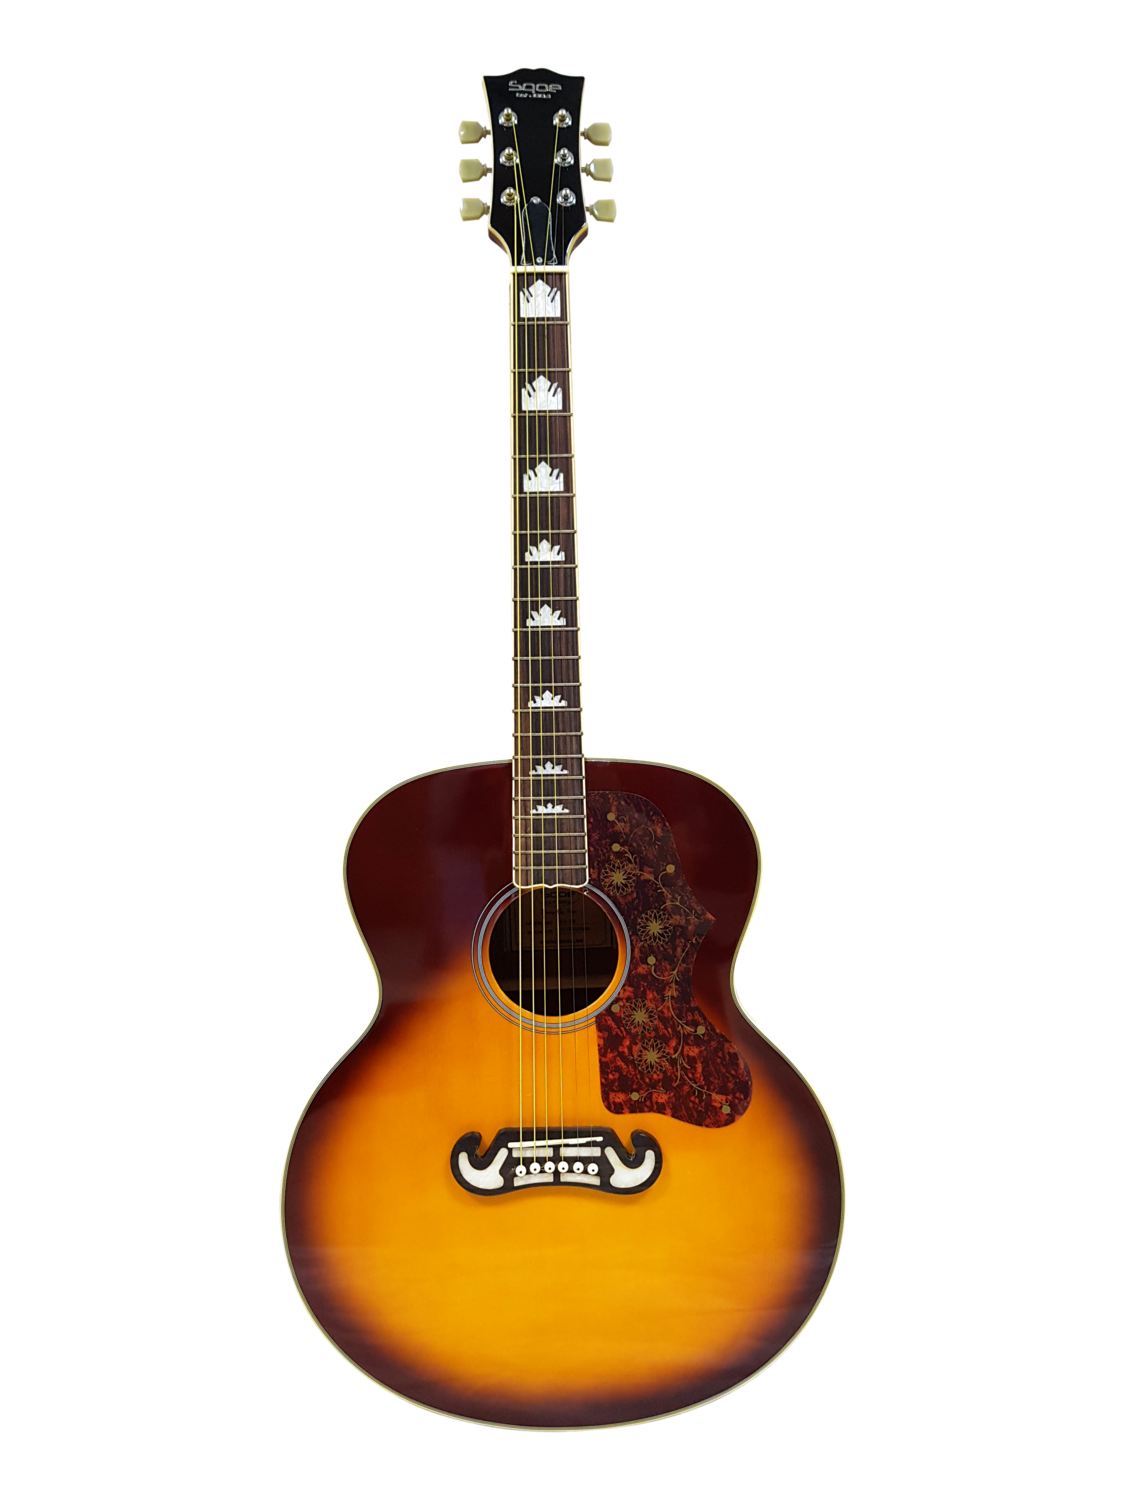 Sqoe 42" Sunburst Acoustic Guitar with Leather Bag and pick.